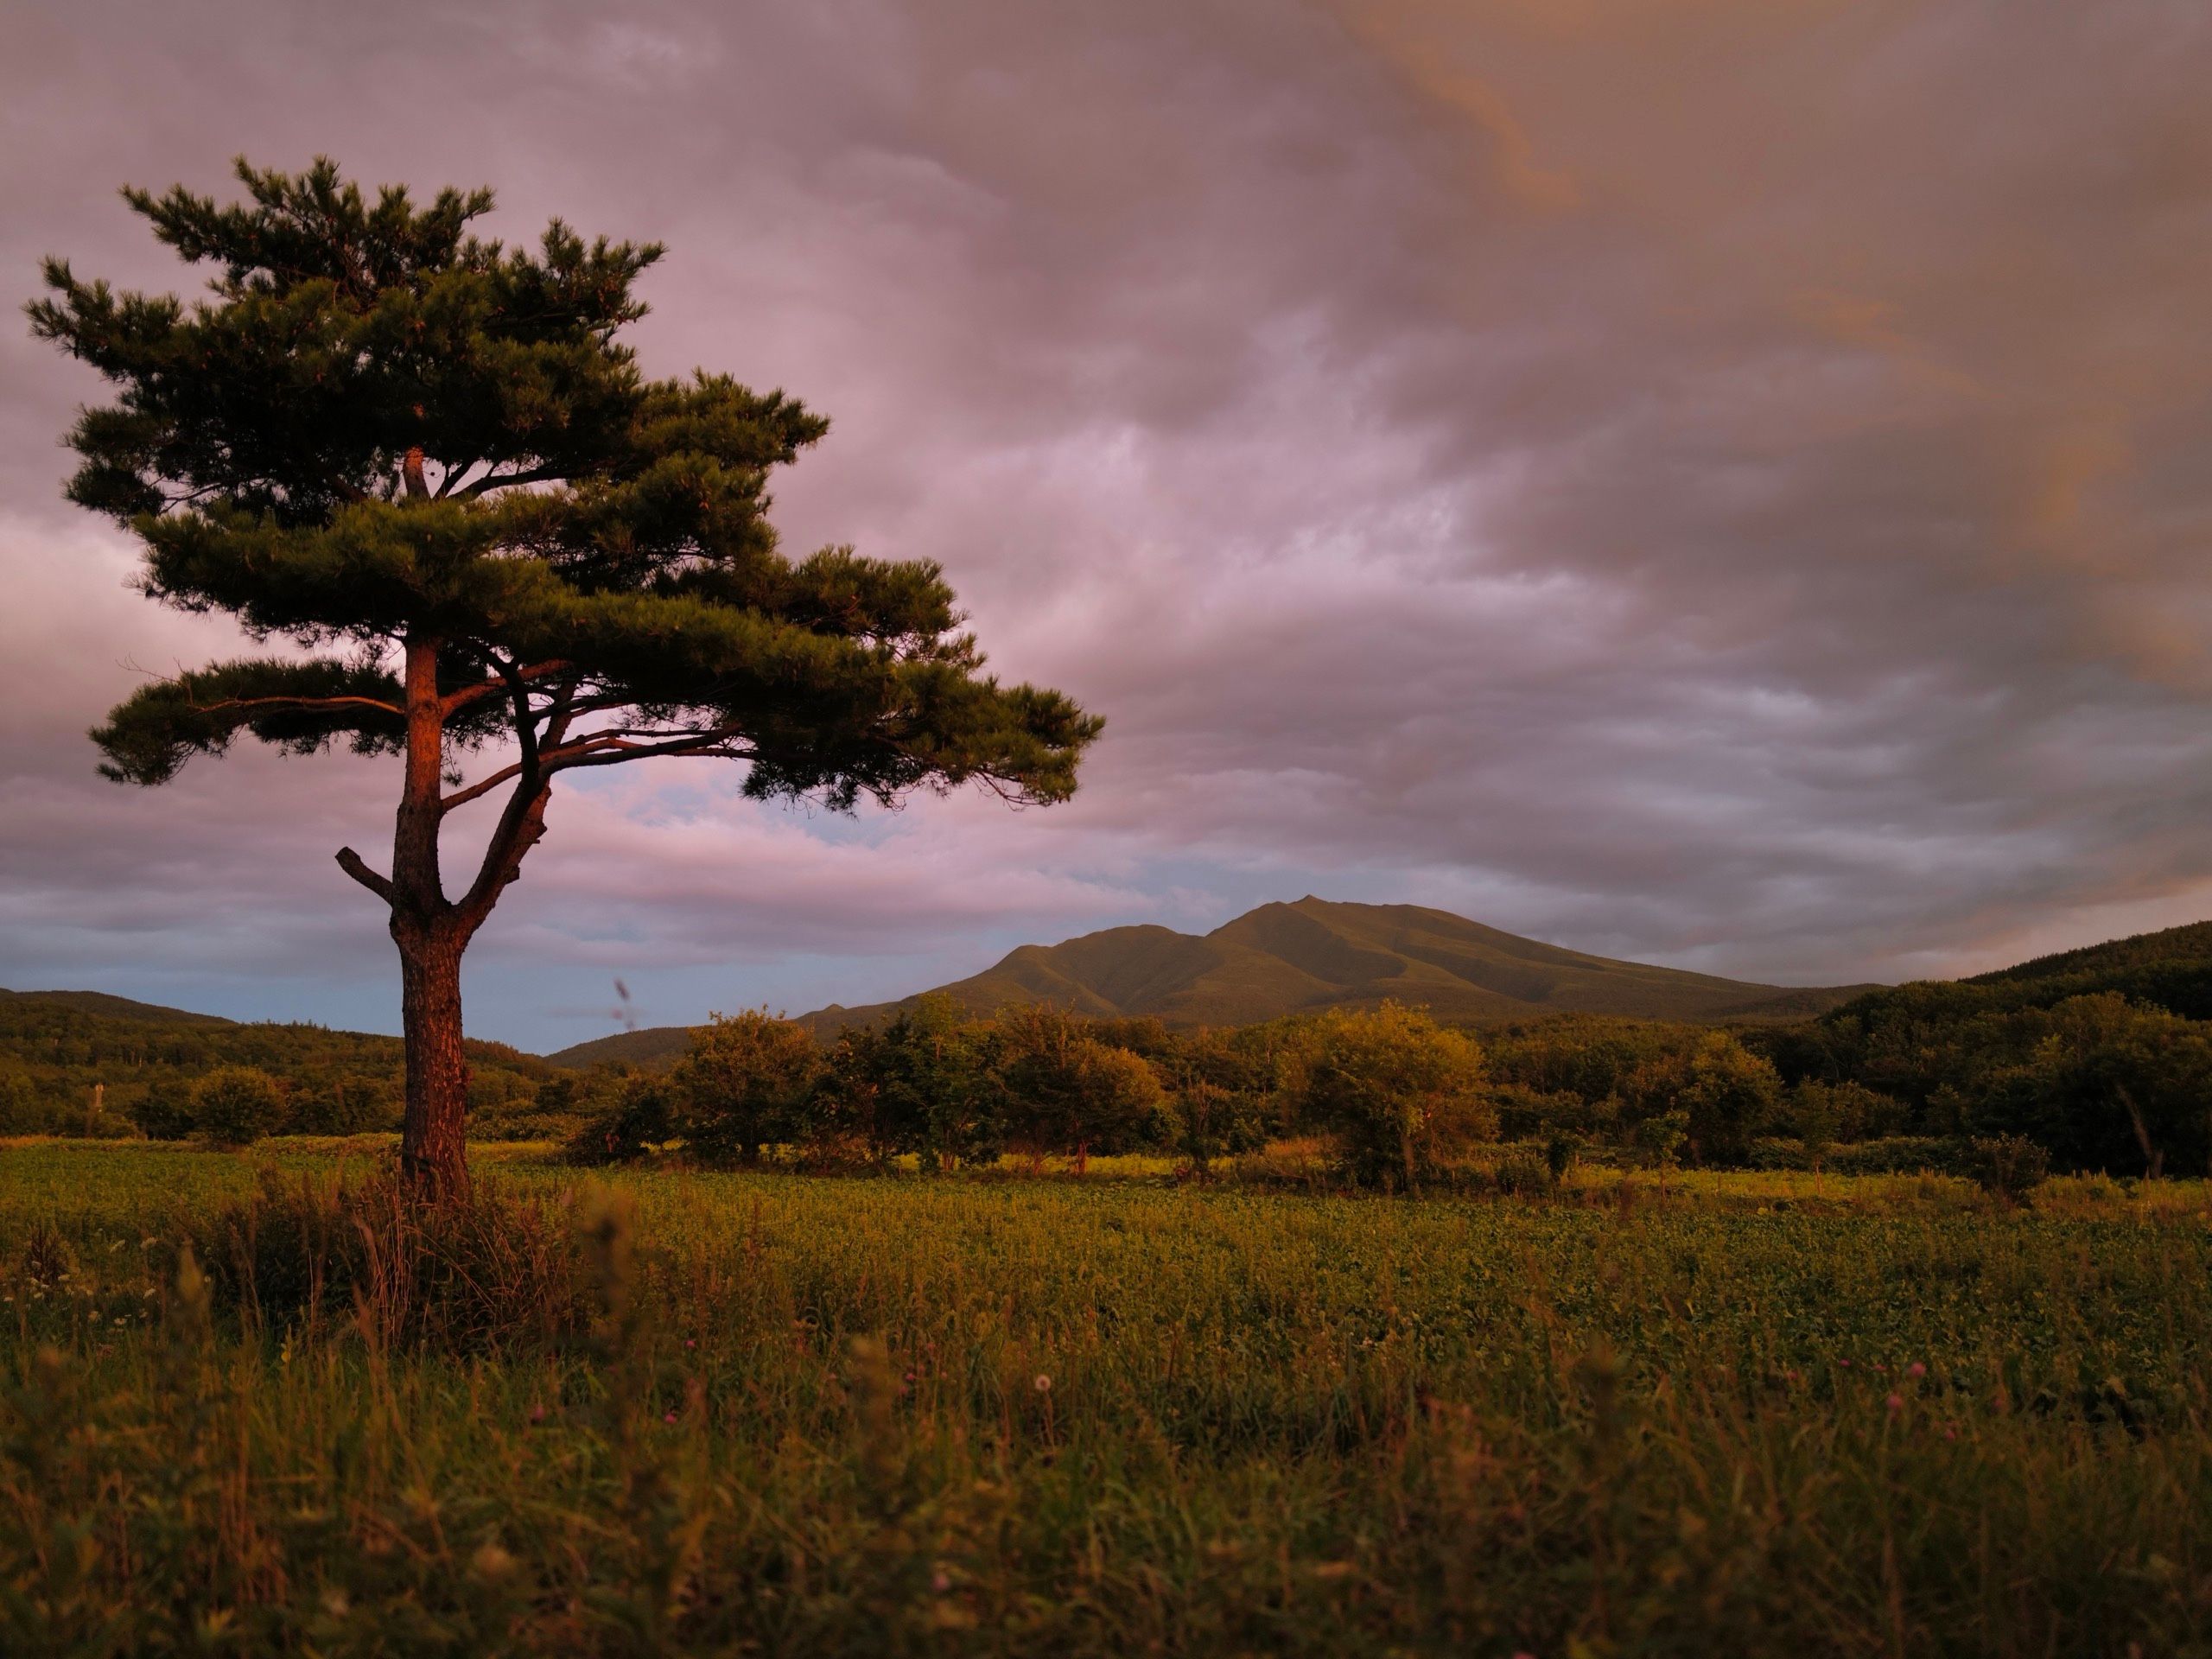 A pine tree and a volcano in the evening light under colorful clouds